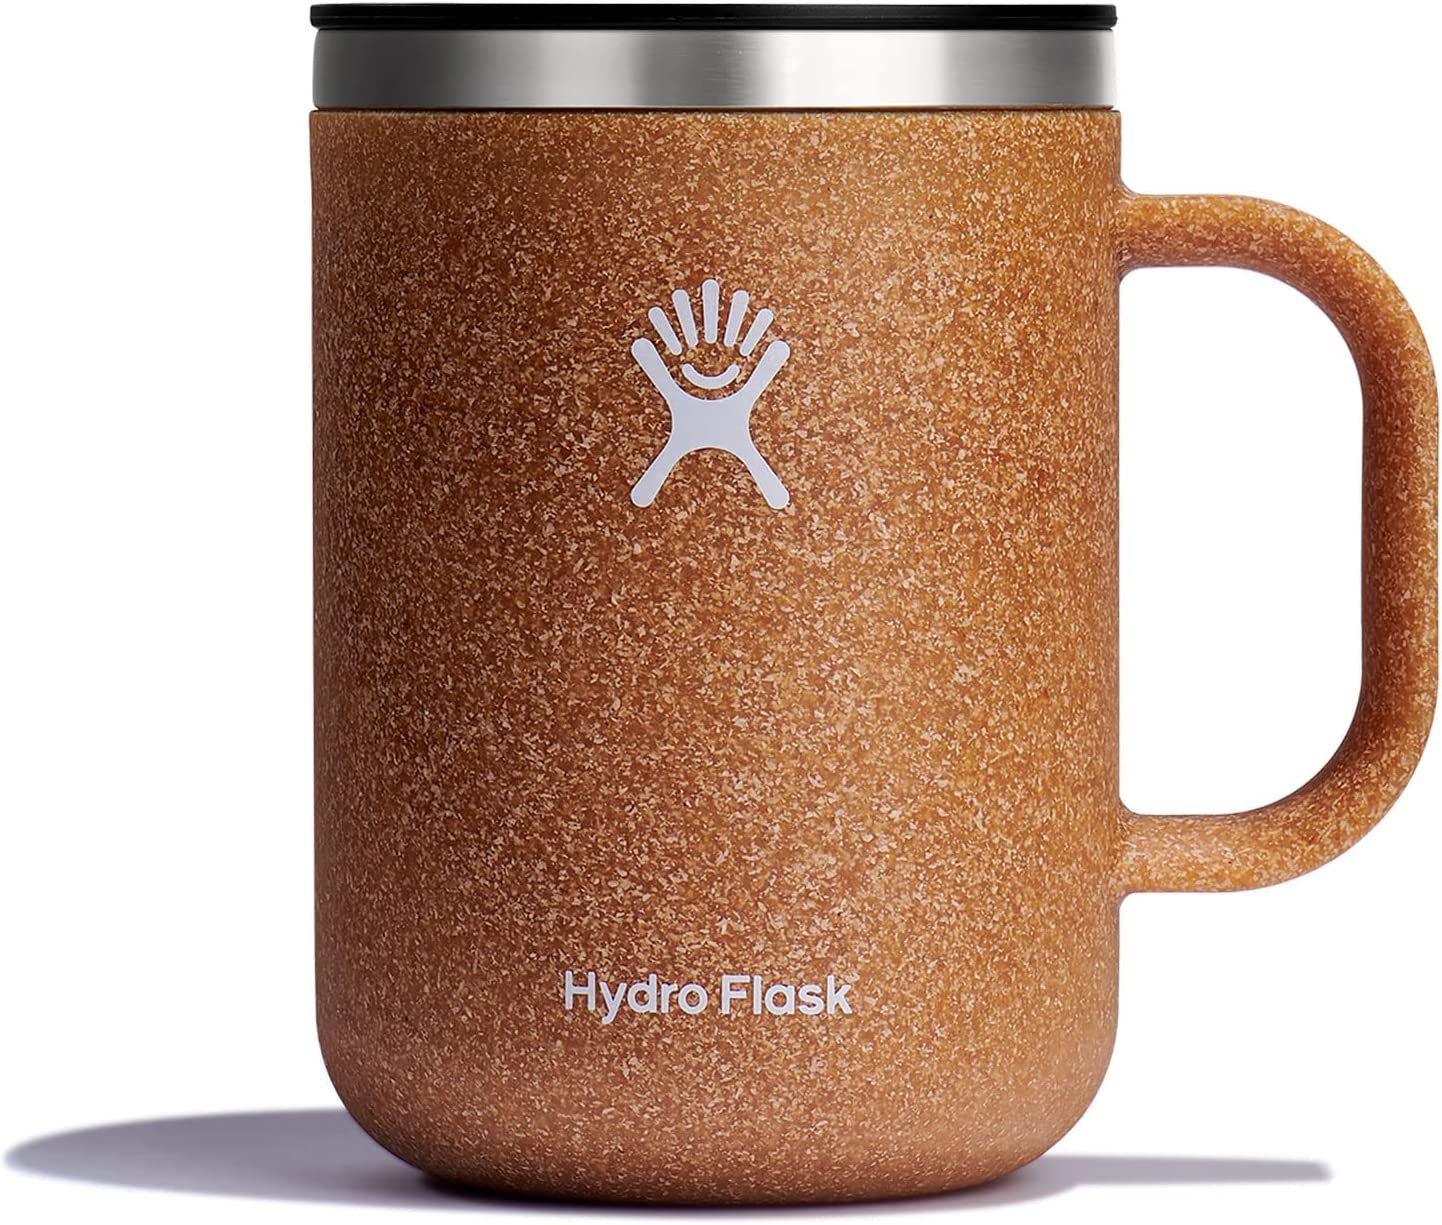 The Hydro Flask Mug Is A Vacuum-Insulated, and 47 similar items